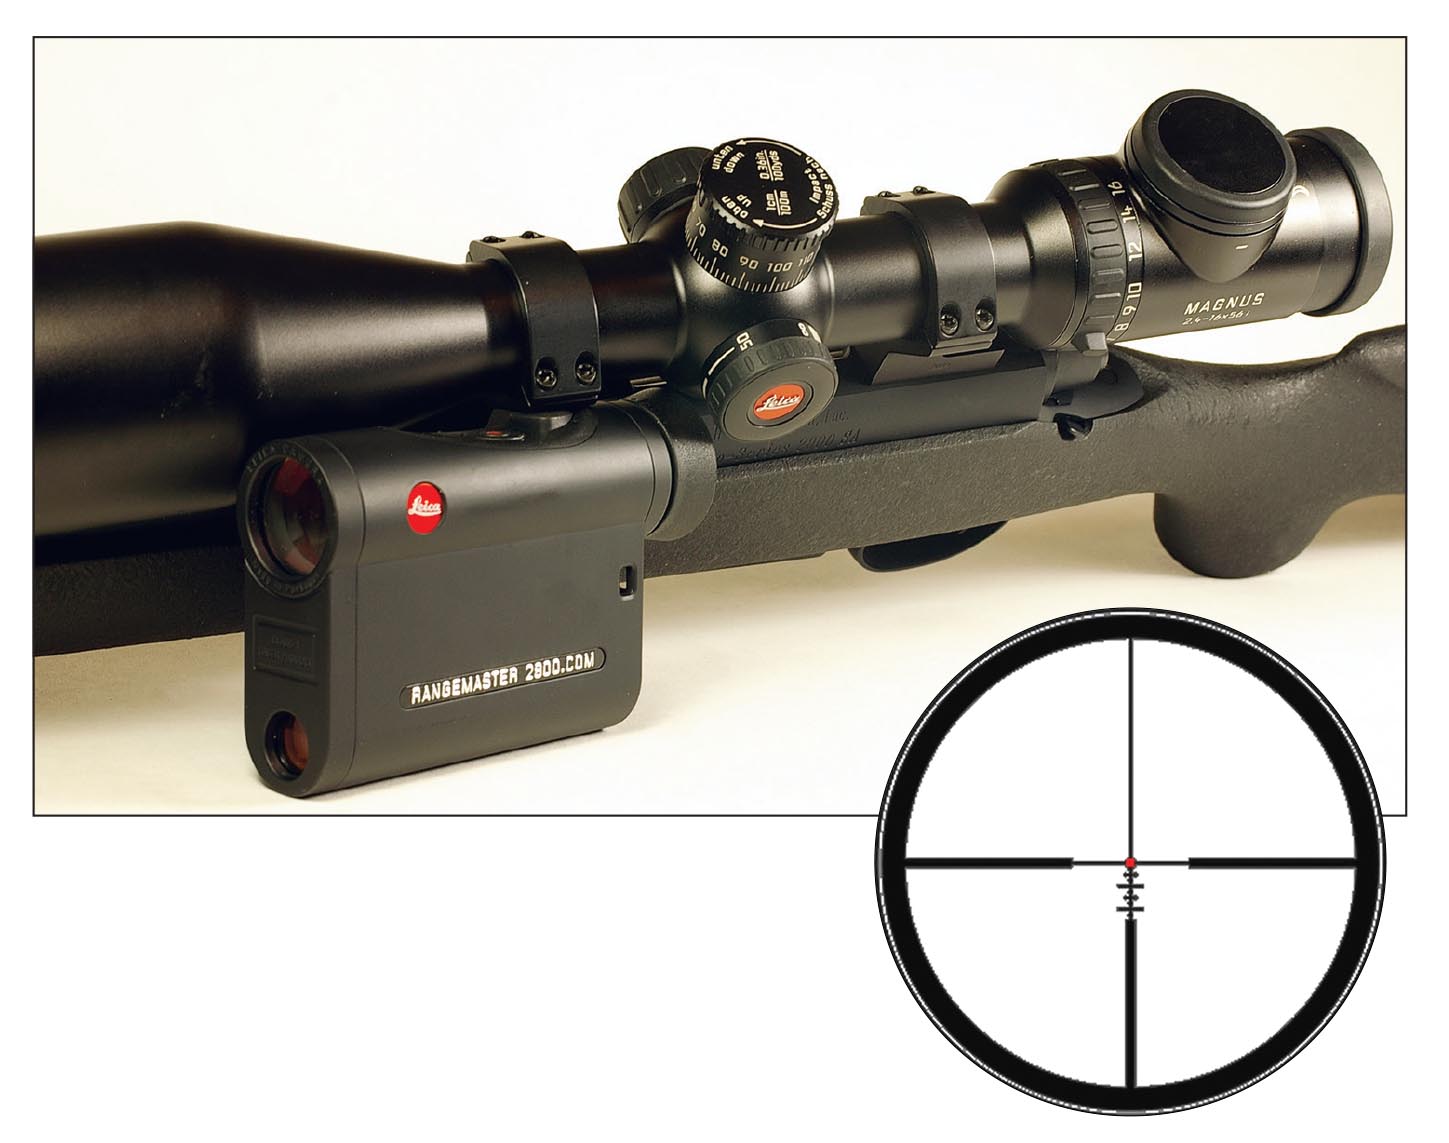 The Magnus 2.4-16x 56i scope and Rangemaster 2800.COM rangefinder were tested with an H-S Precision .300 Winchester Short Magnum rifle.